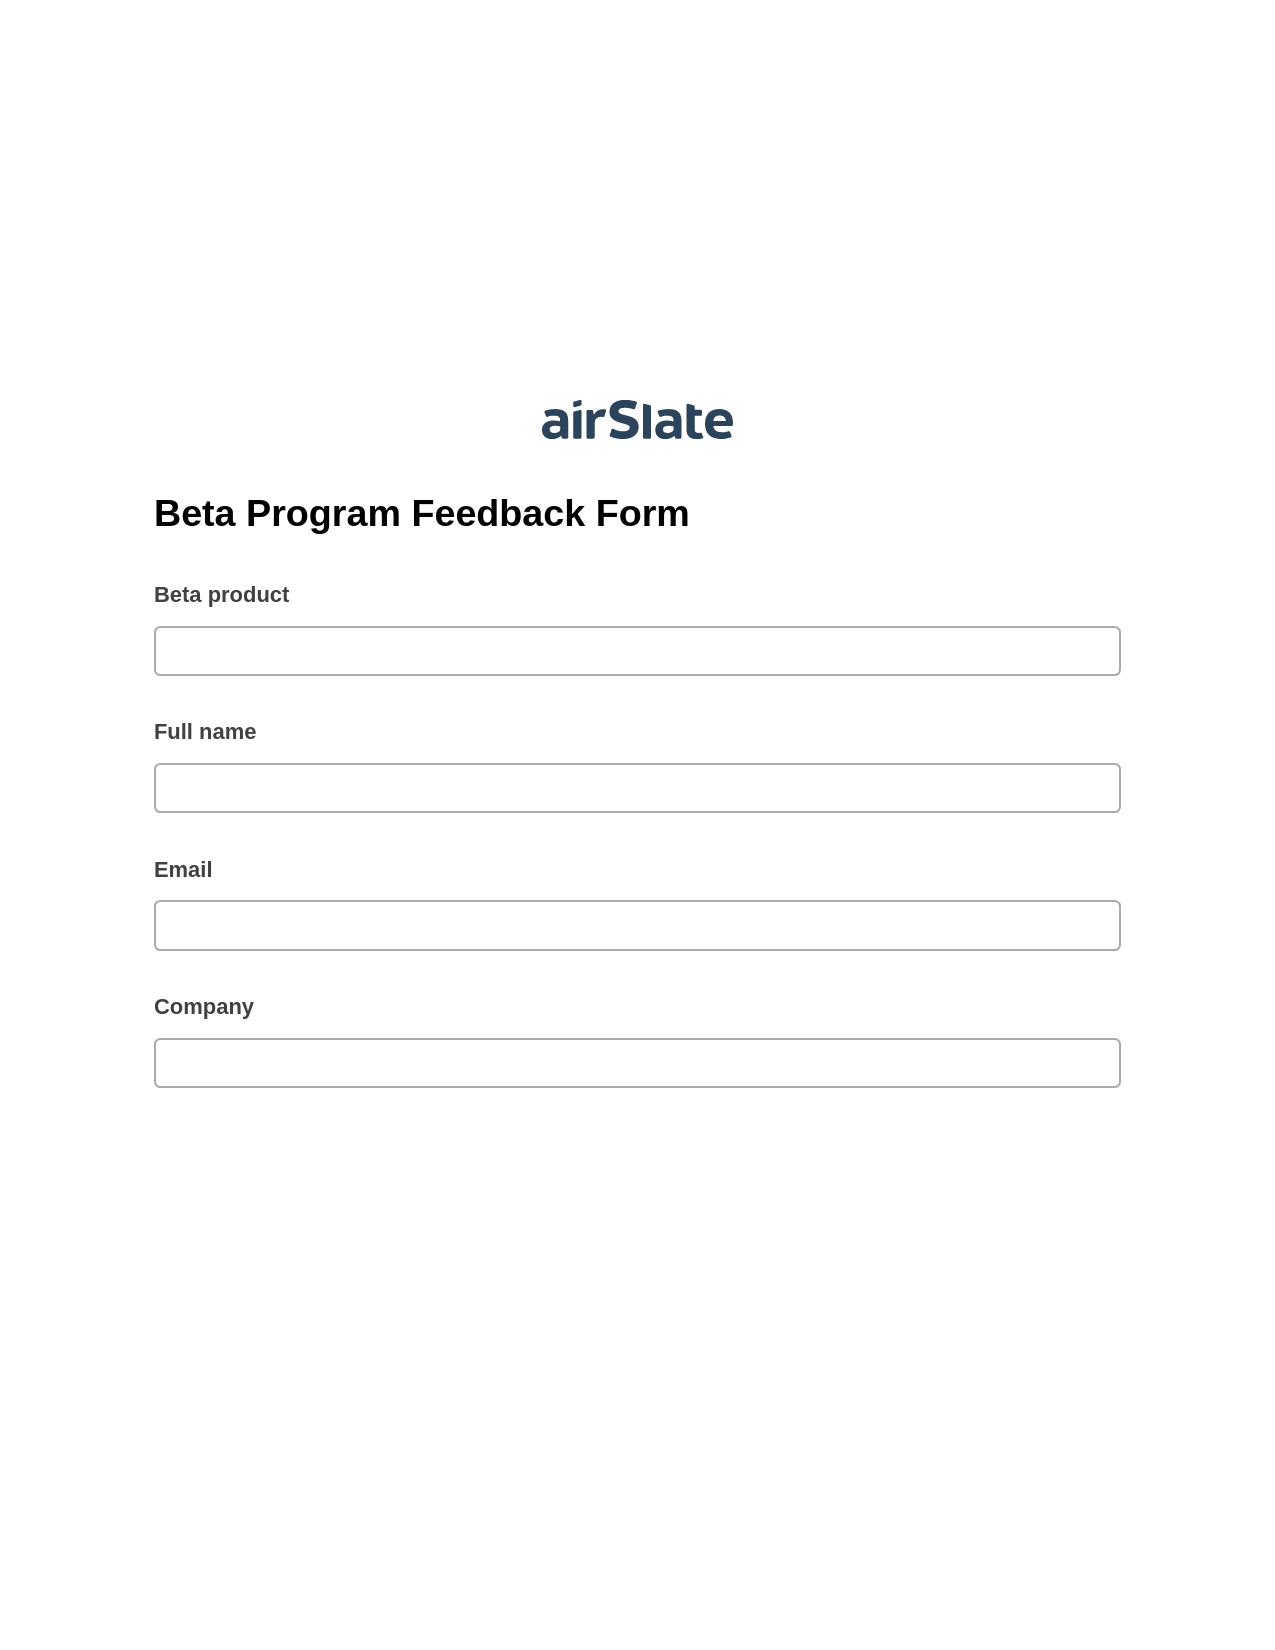 Multirole Beta Program Feedback Form Pre-fill from another Slate Bot, Update Salesforce Record Bot, Archive to SharePoint Folder Bot